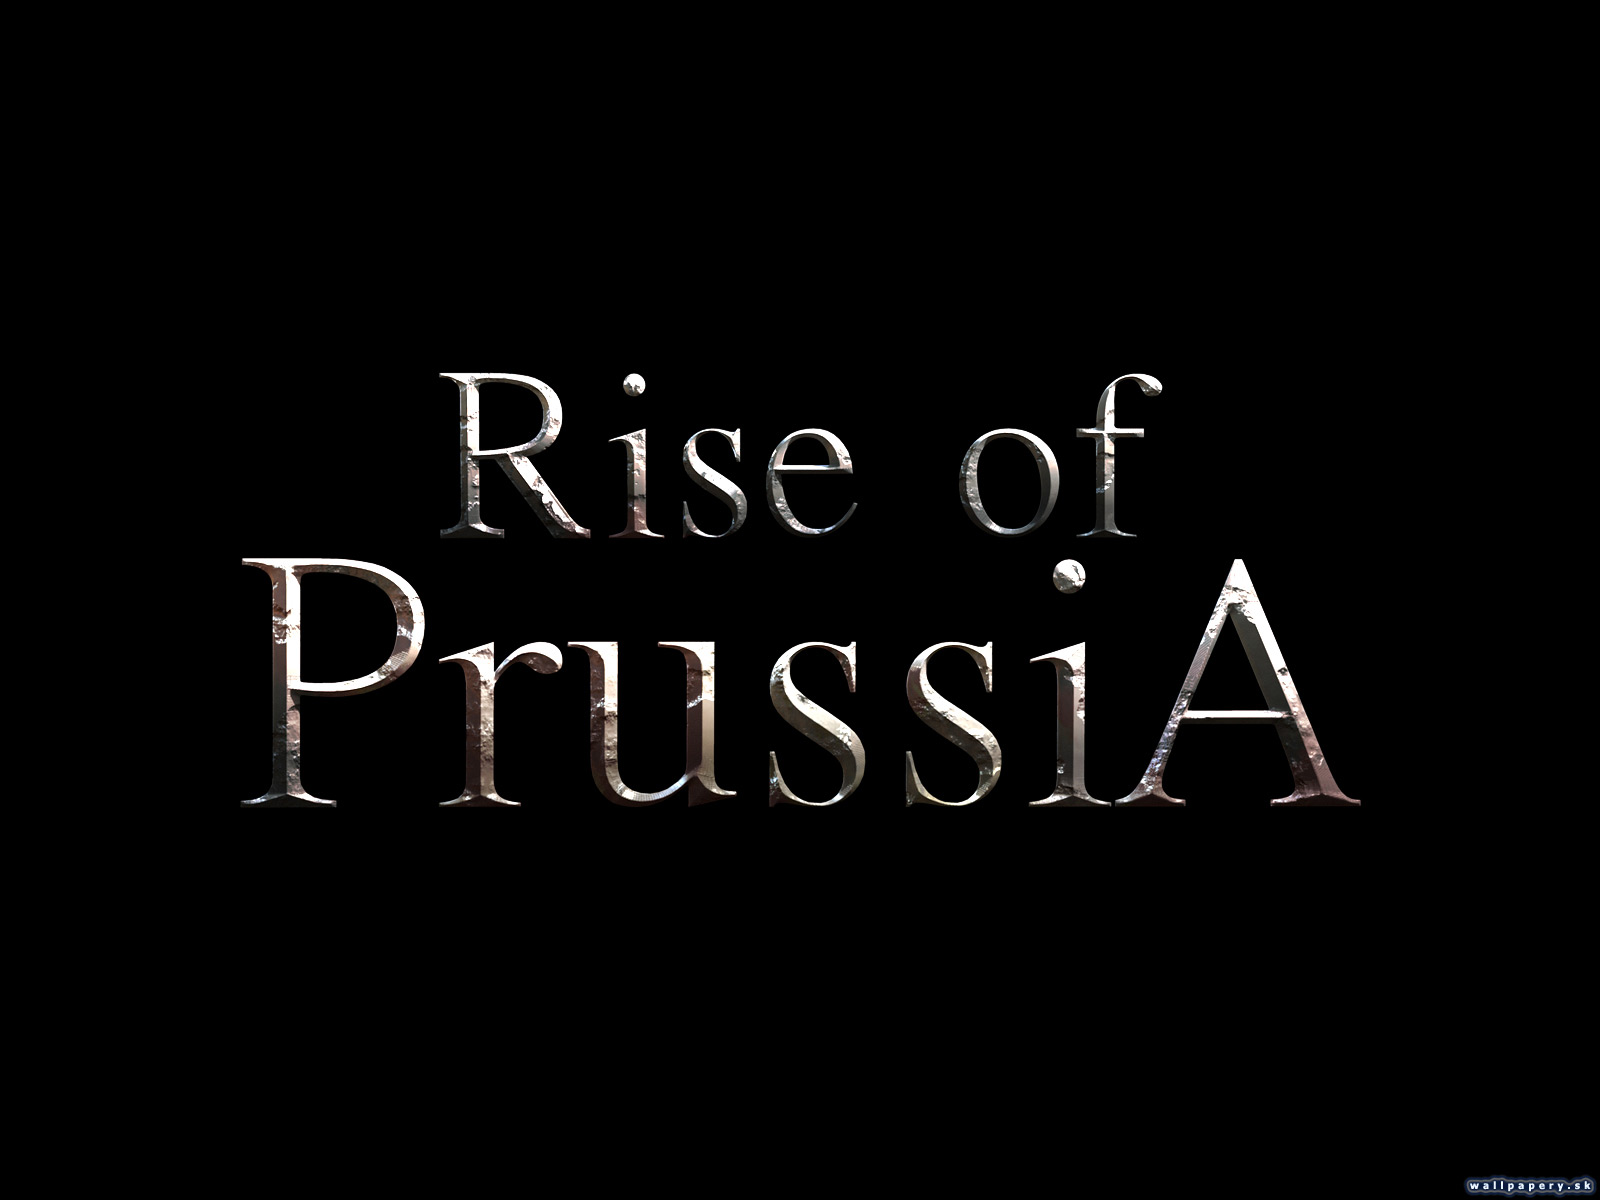 Rise of Prussia - wallpaper 4